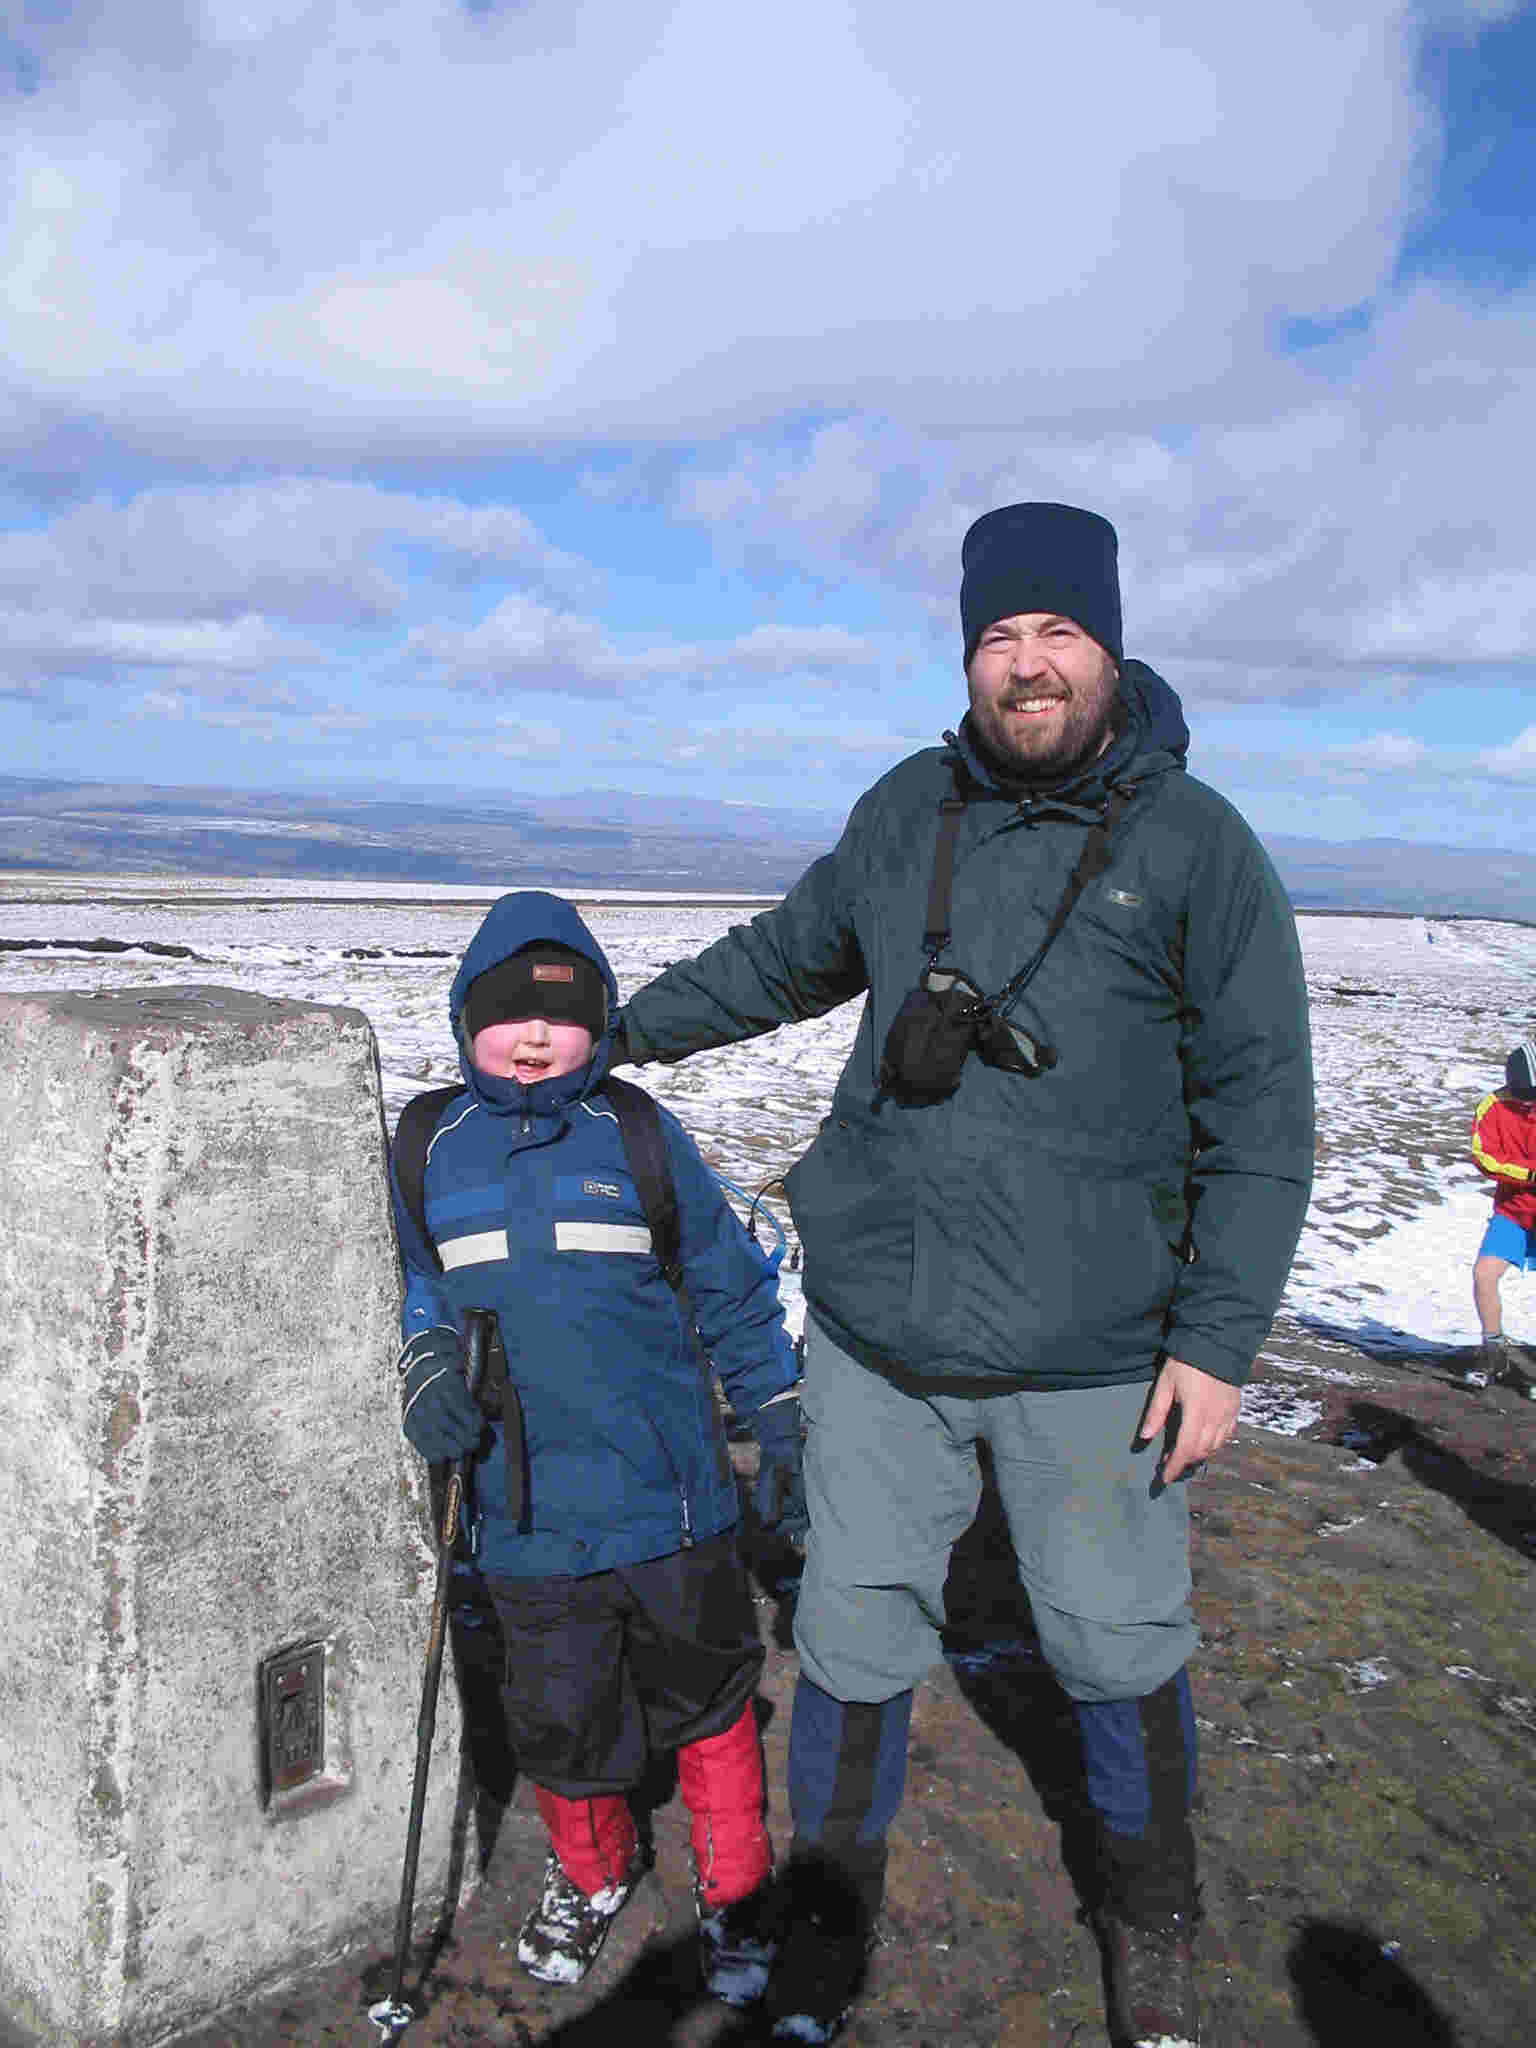 Liam and Tom on Pendle Hill